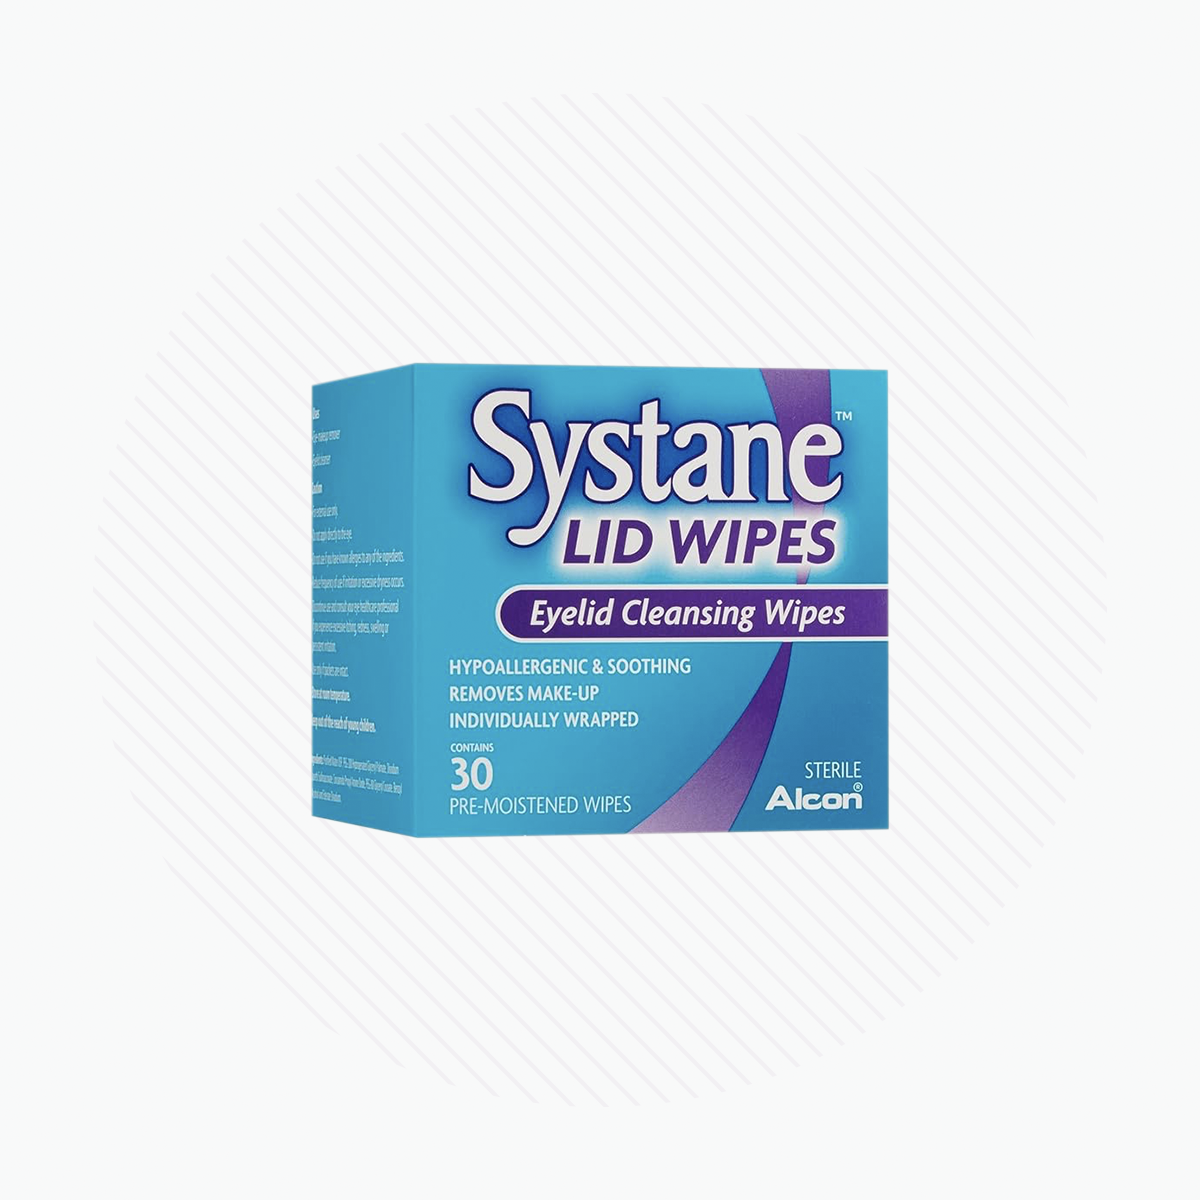 Systane Lid Wipes Eyelid Cleansing, Hypoallergenic, Make-up Remover Wipes, (30 Count)